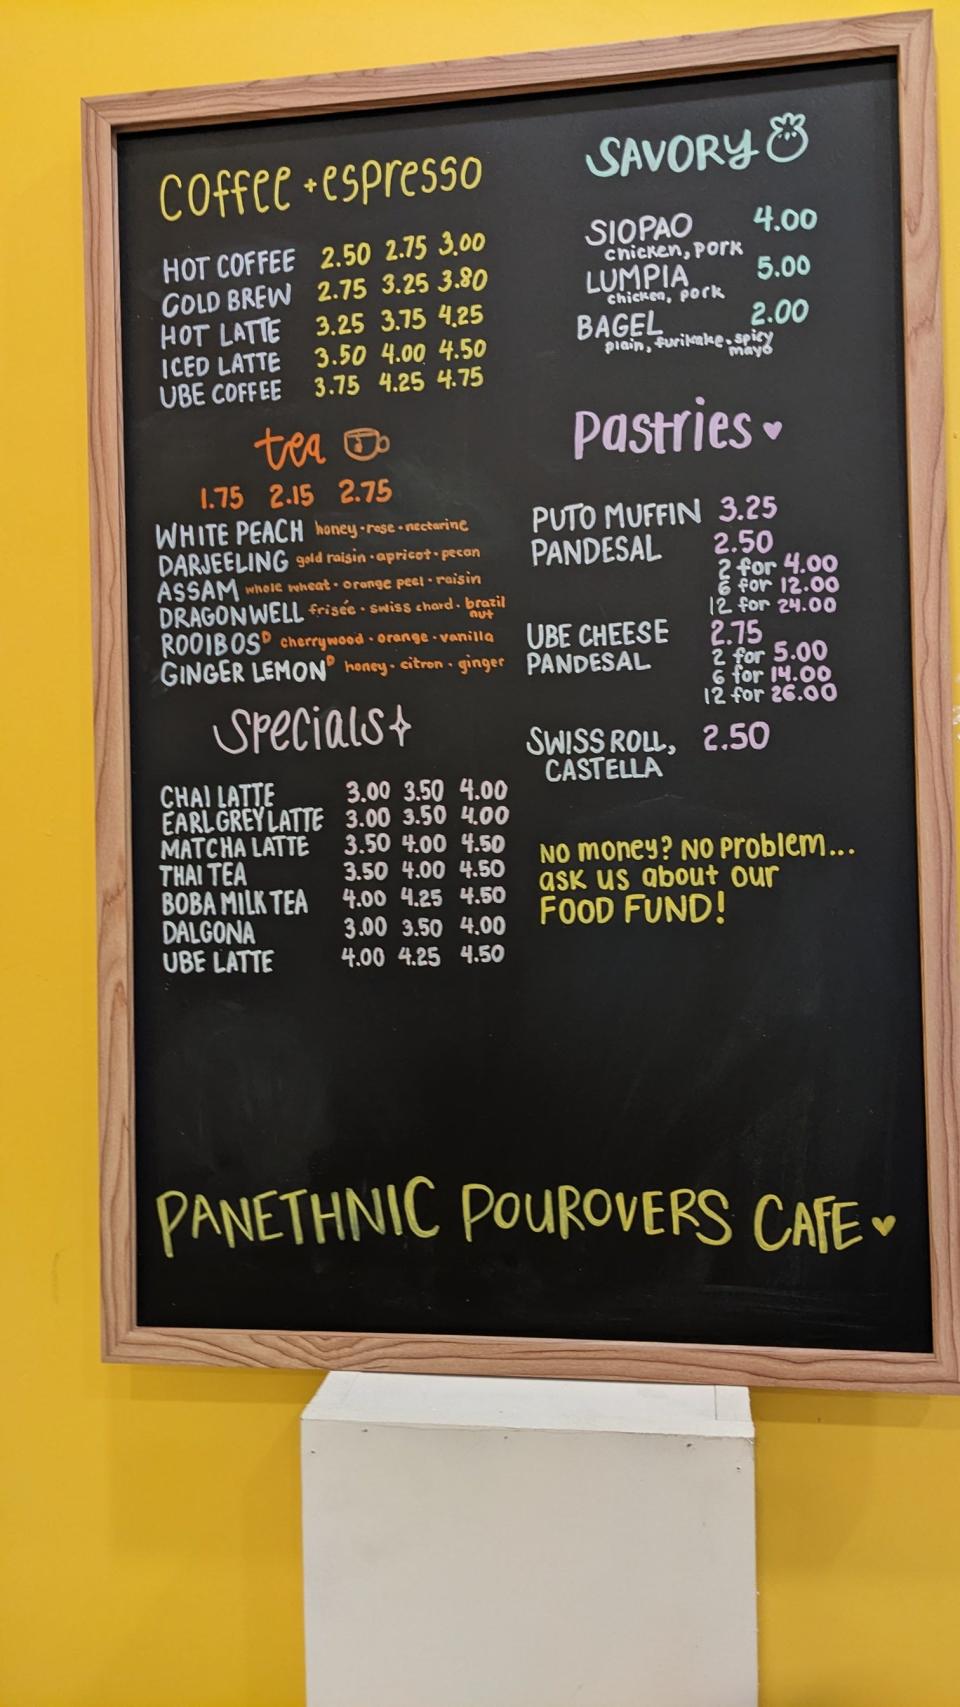 The menu at Panethnic Pourovers, a new café and community center opening in North Quincy this Saturday, Oct. 21.